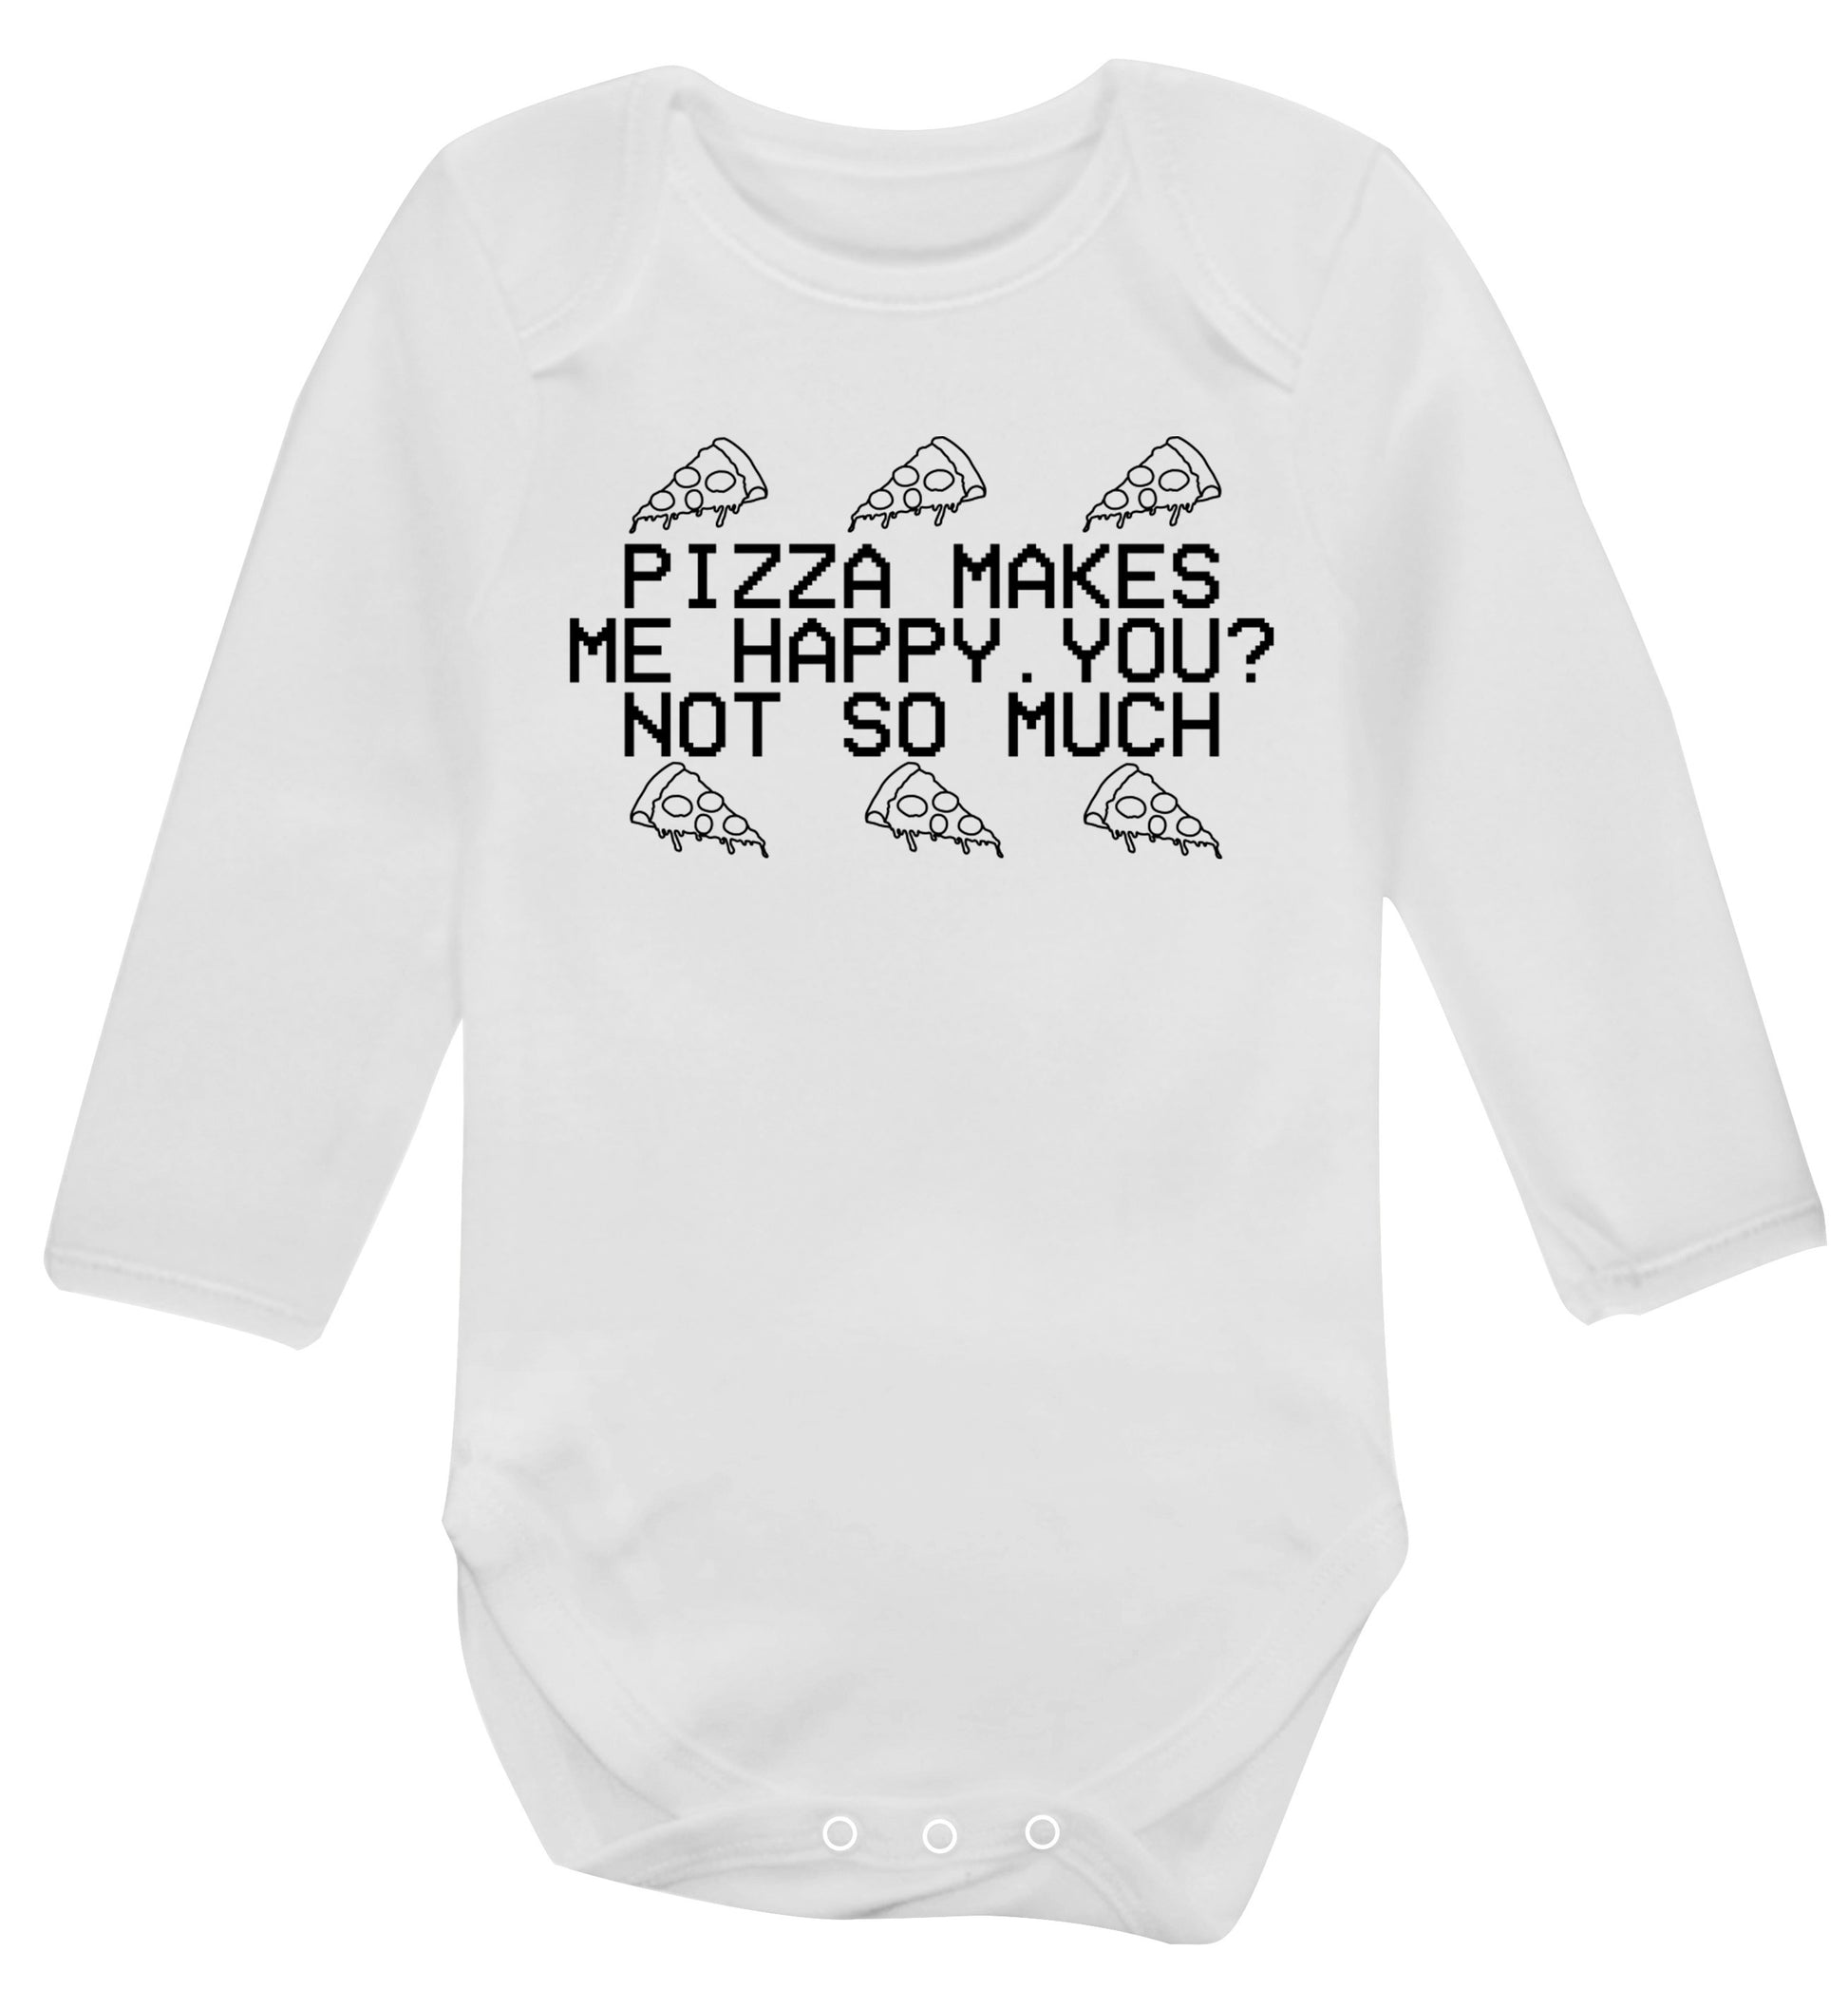 Pizza makes me happy, You? Not so much Baby Vest long sleeved white 6-12 months